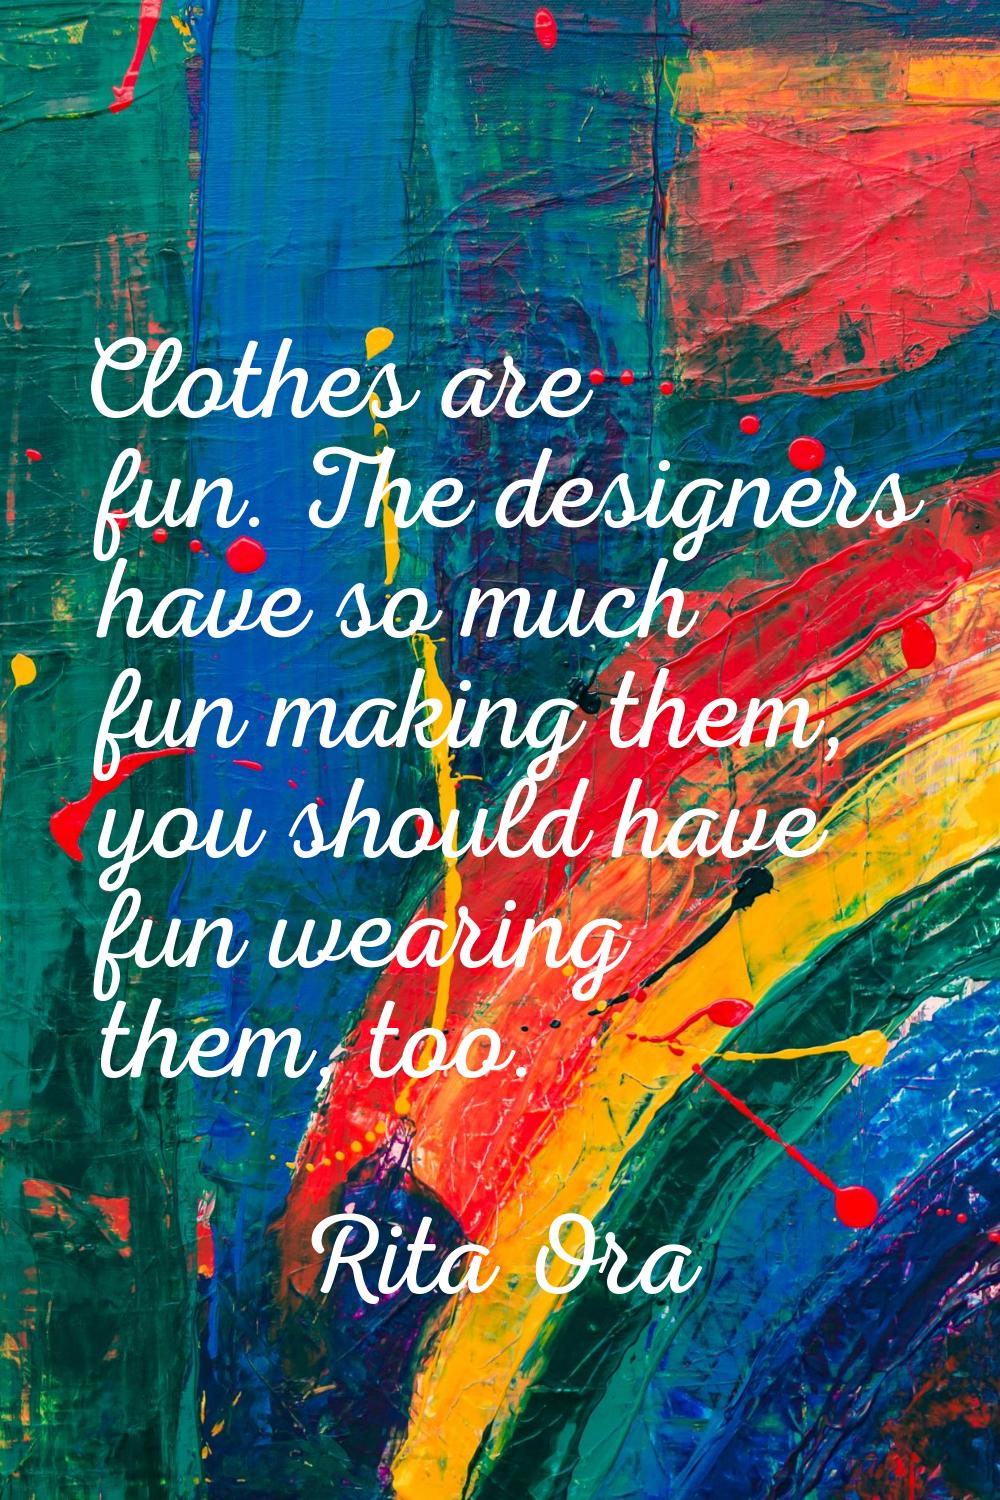 Clothes are fun. The designers have so much fun making them, you should have fun wearing them, too.